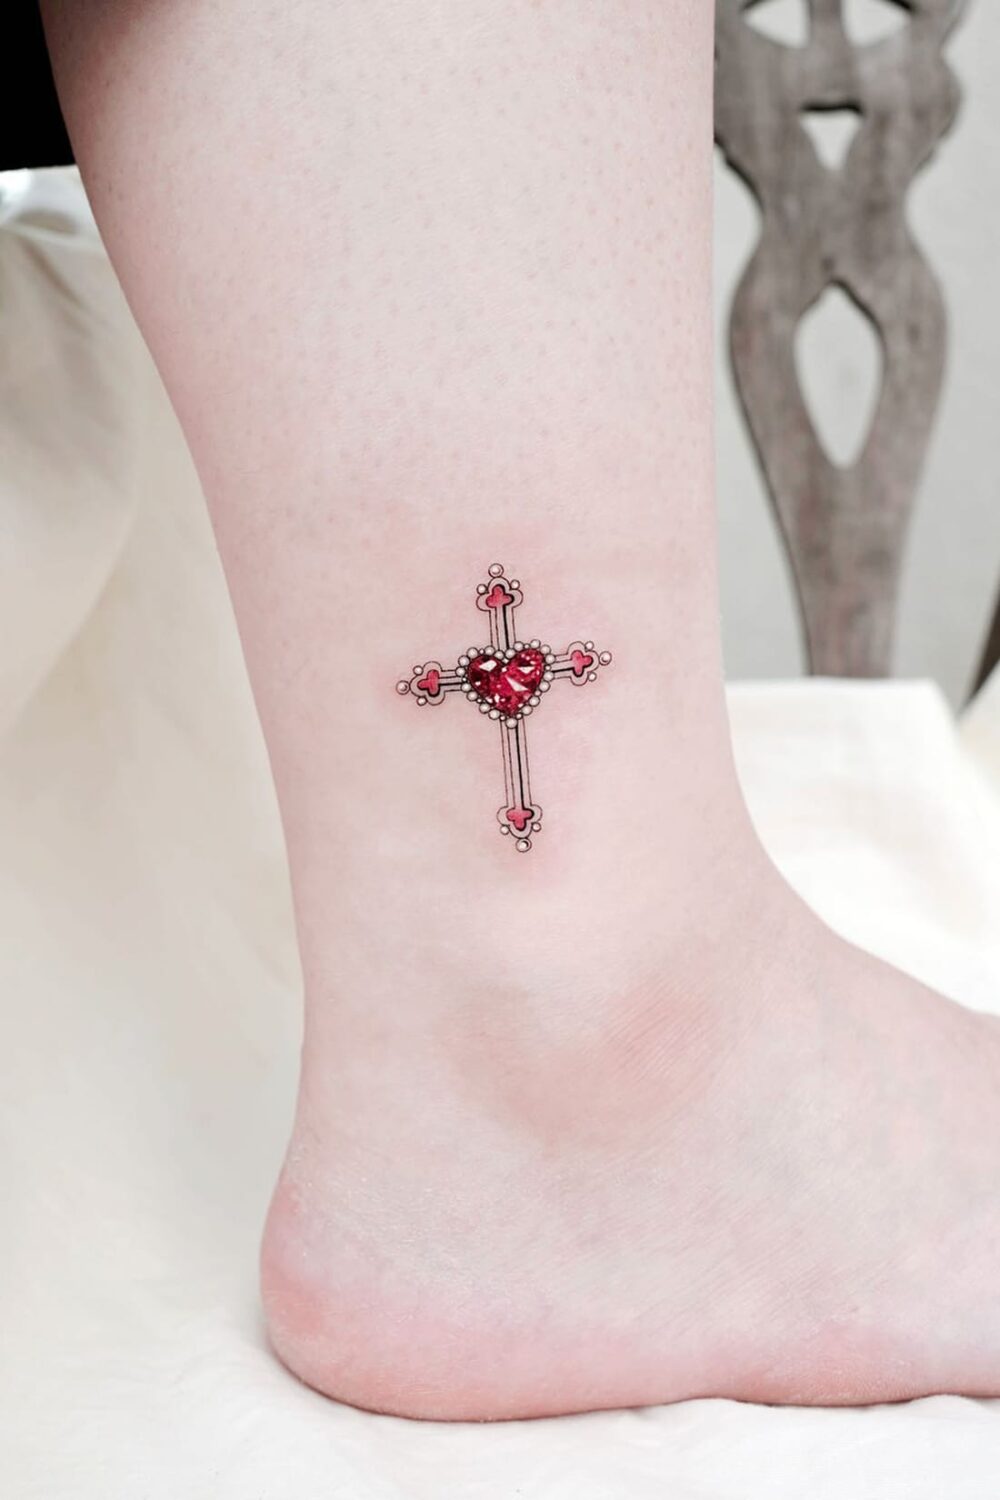 Small cross tattoo on ankle